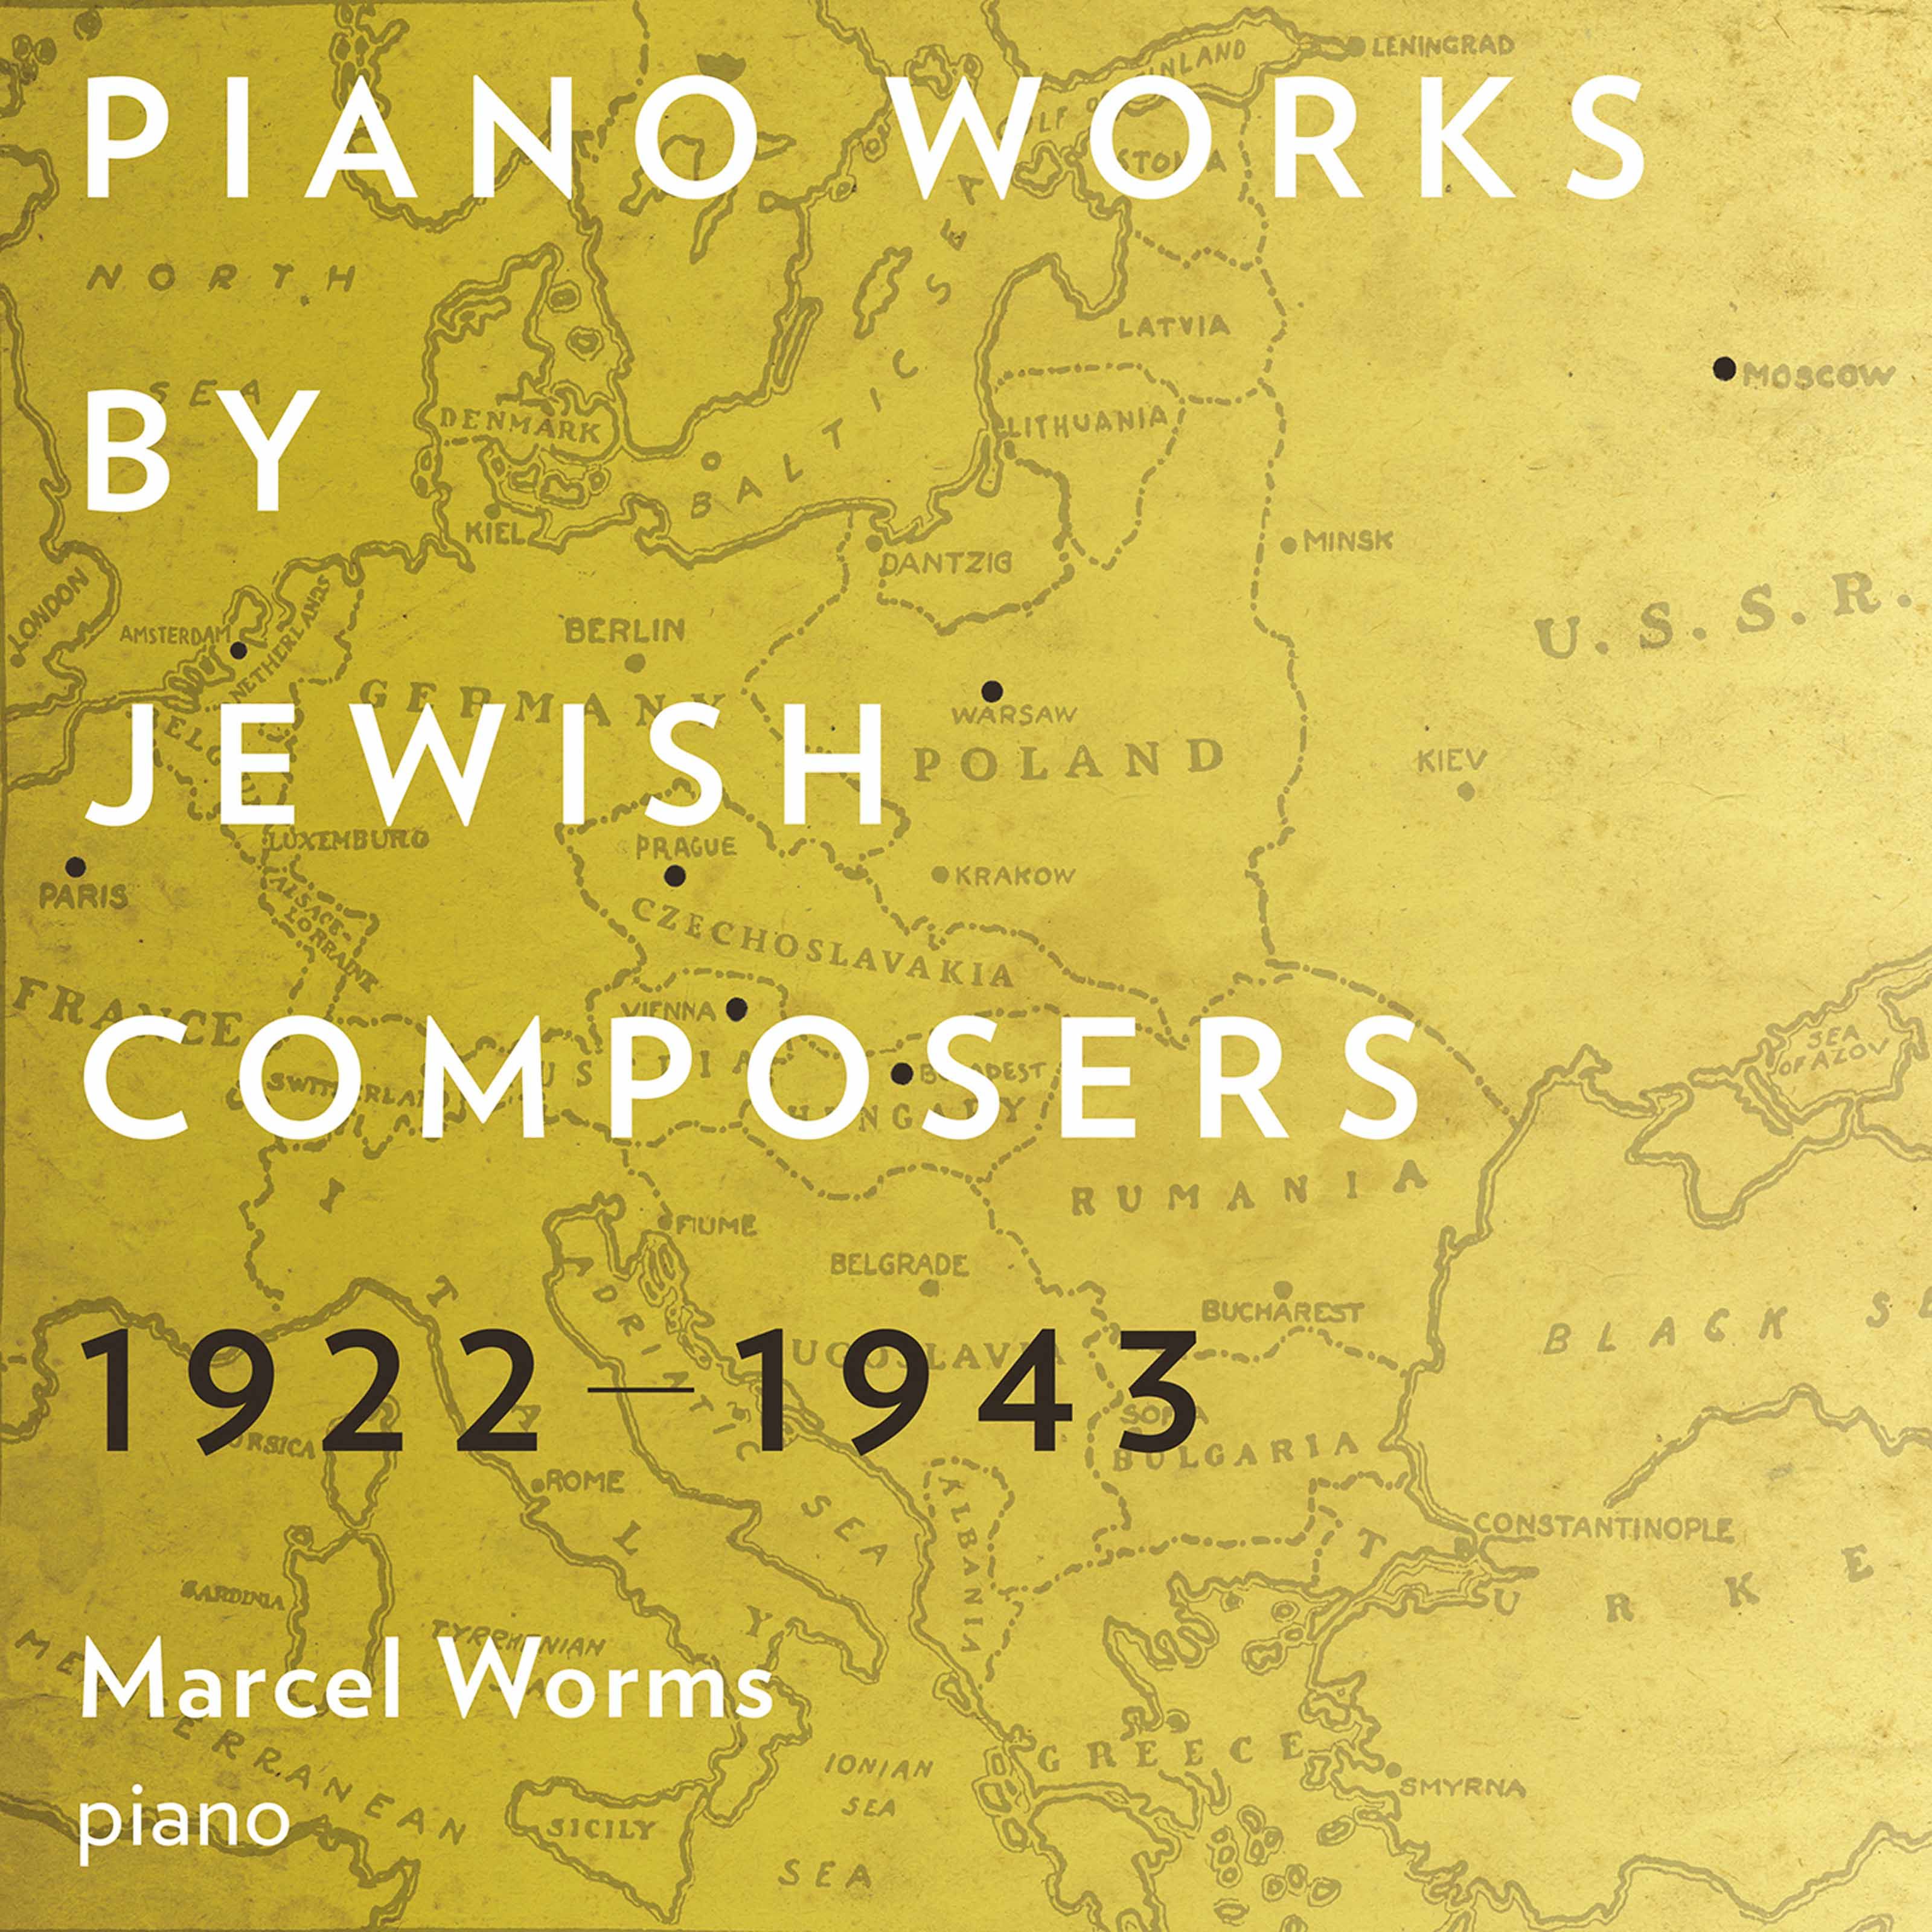 Marcel Worms- Piano Works By Jewish Composers-1922-1943 24-96